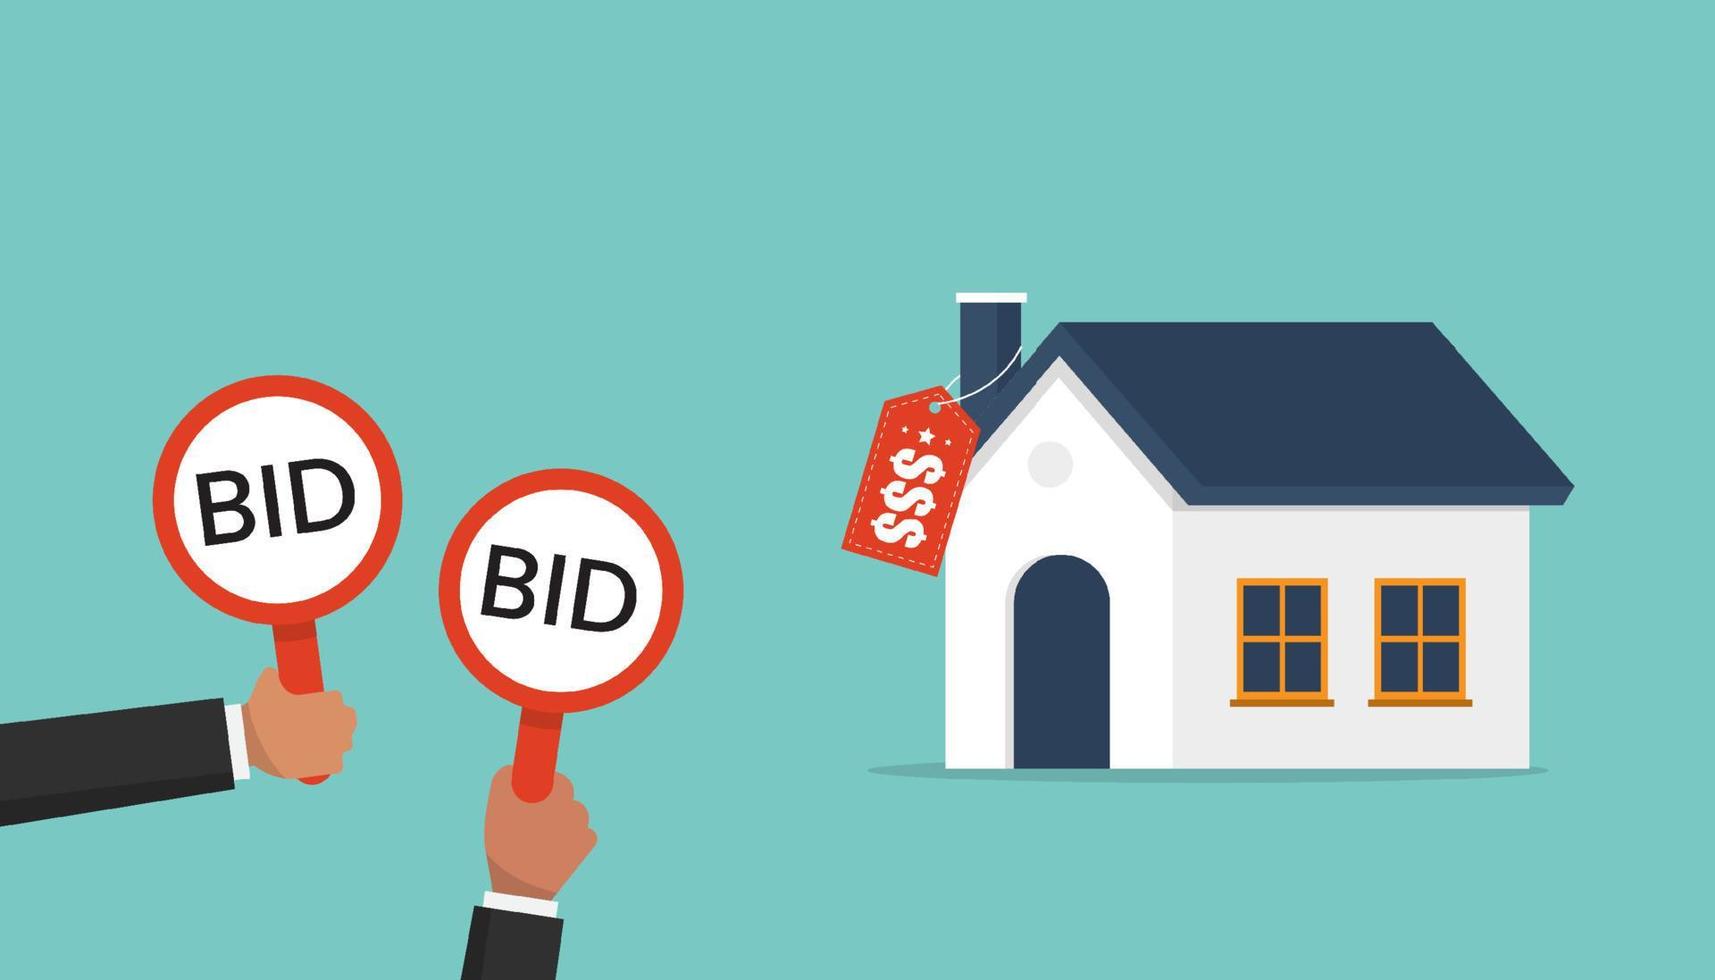 Businessmen hold bid signs for auction a house, buyers place bids, auction and bidding concept vector